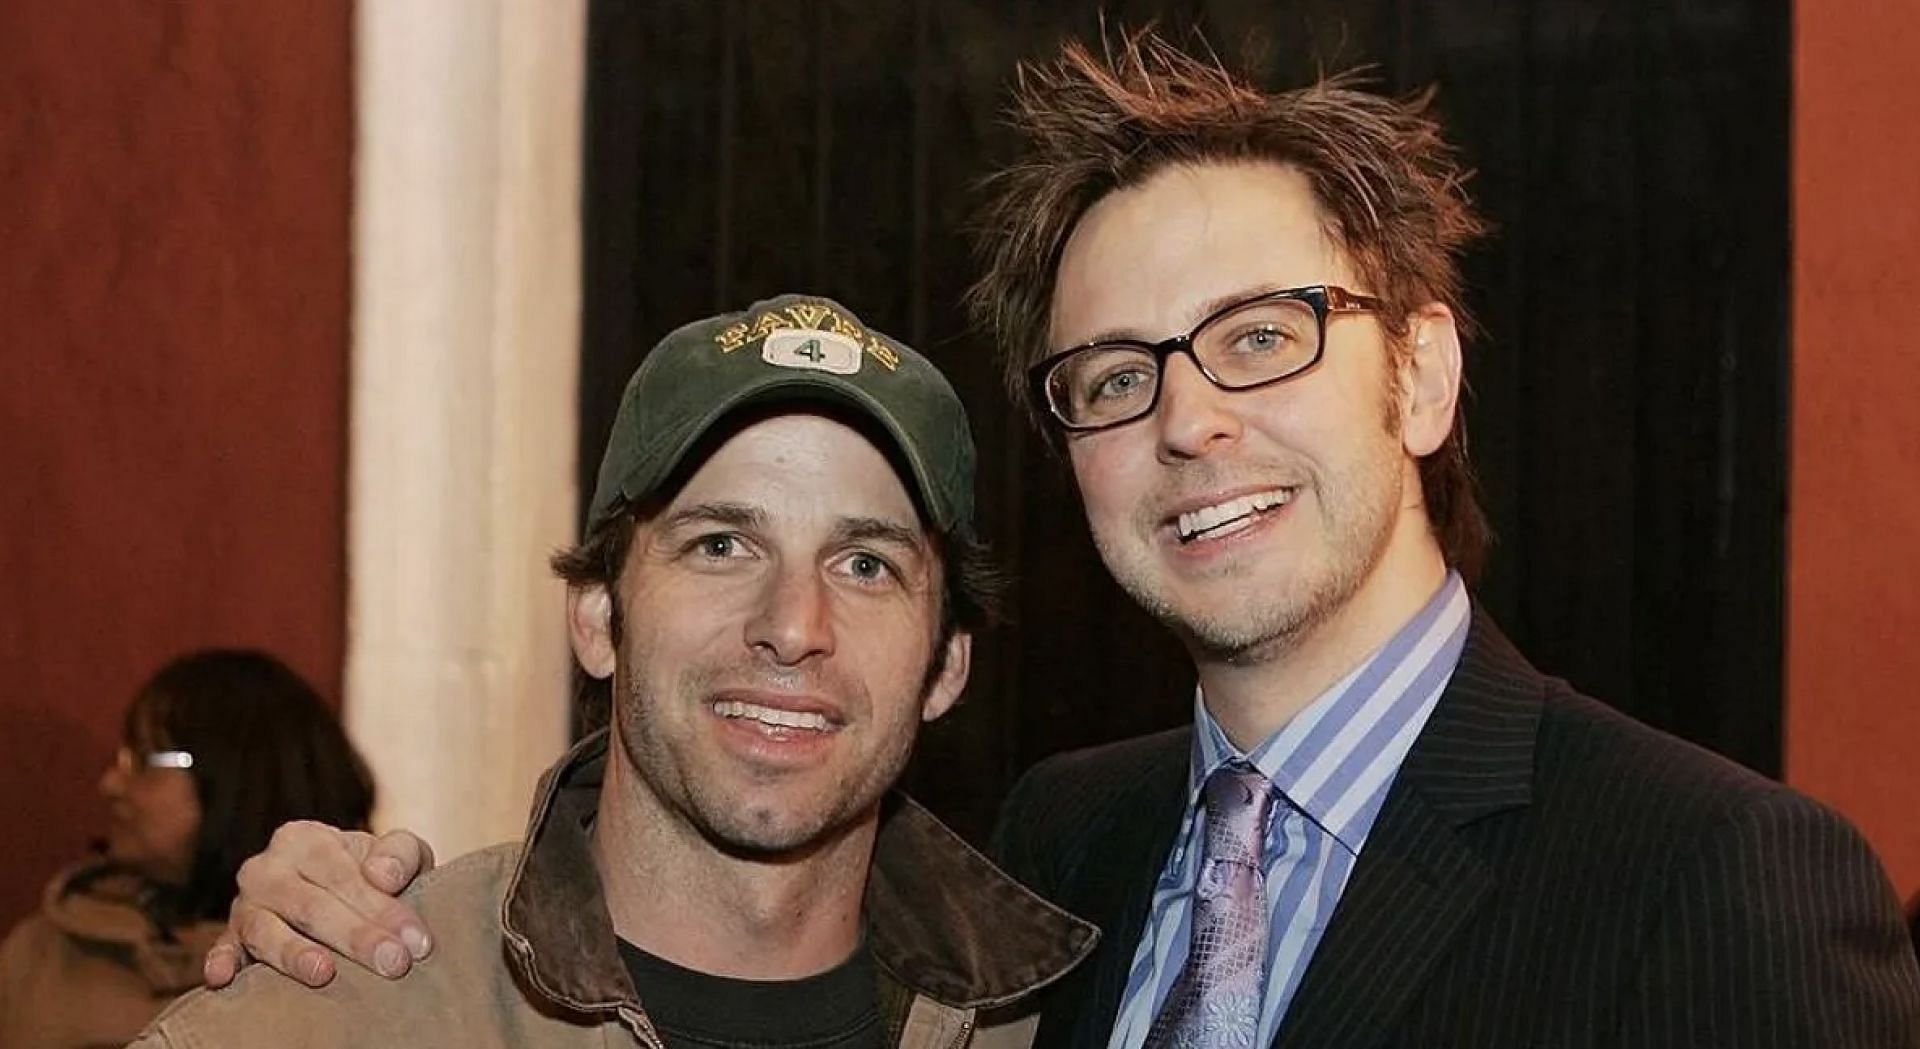 Zack Snyder extends his support to James Gunn for the future of DC (Image via Getty)